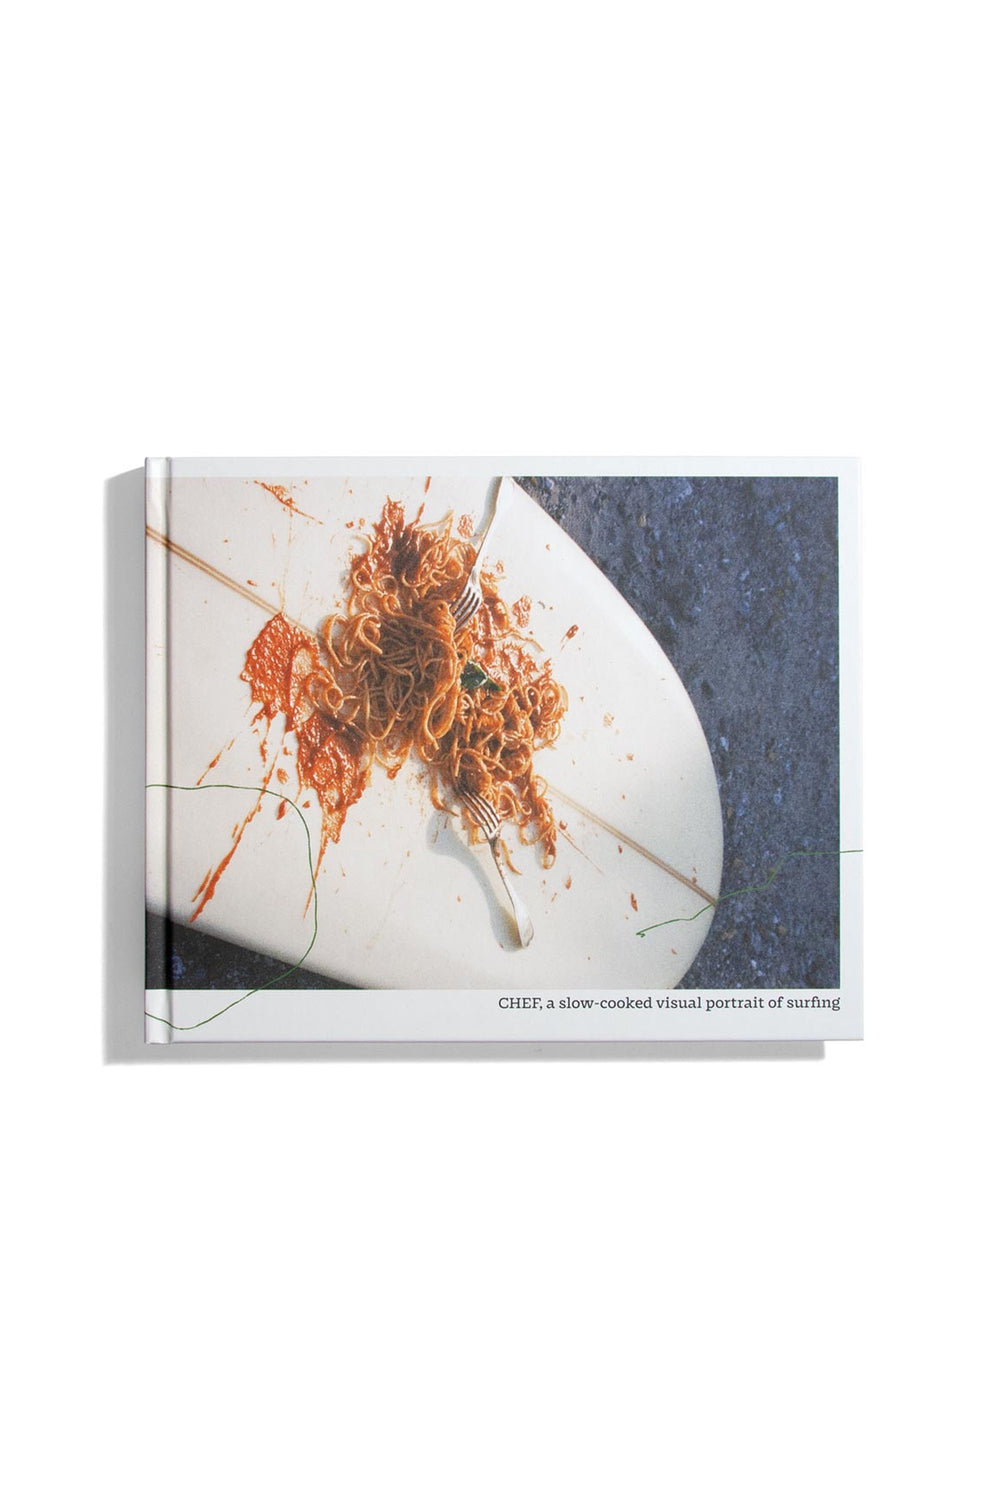 Pukas-Surf-Shop-book-chef-a-slow-cooked-visual-portrait-of-surfing